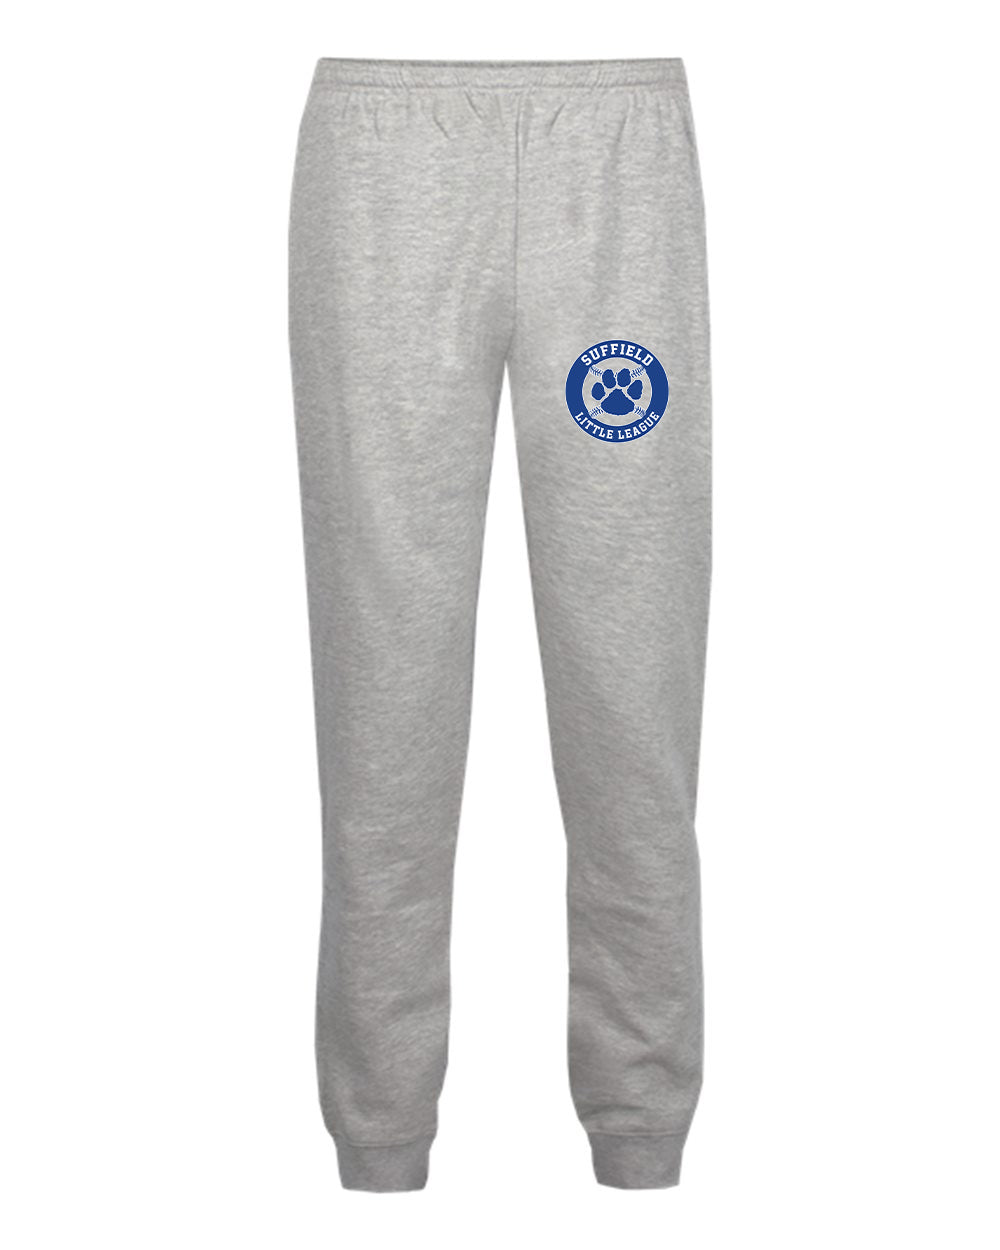 Suffield LL Youth Badger Joggers - 2215 (color options available)